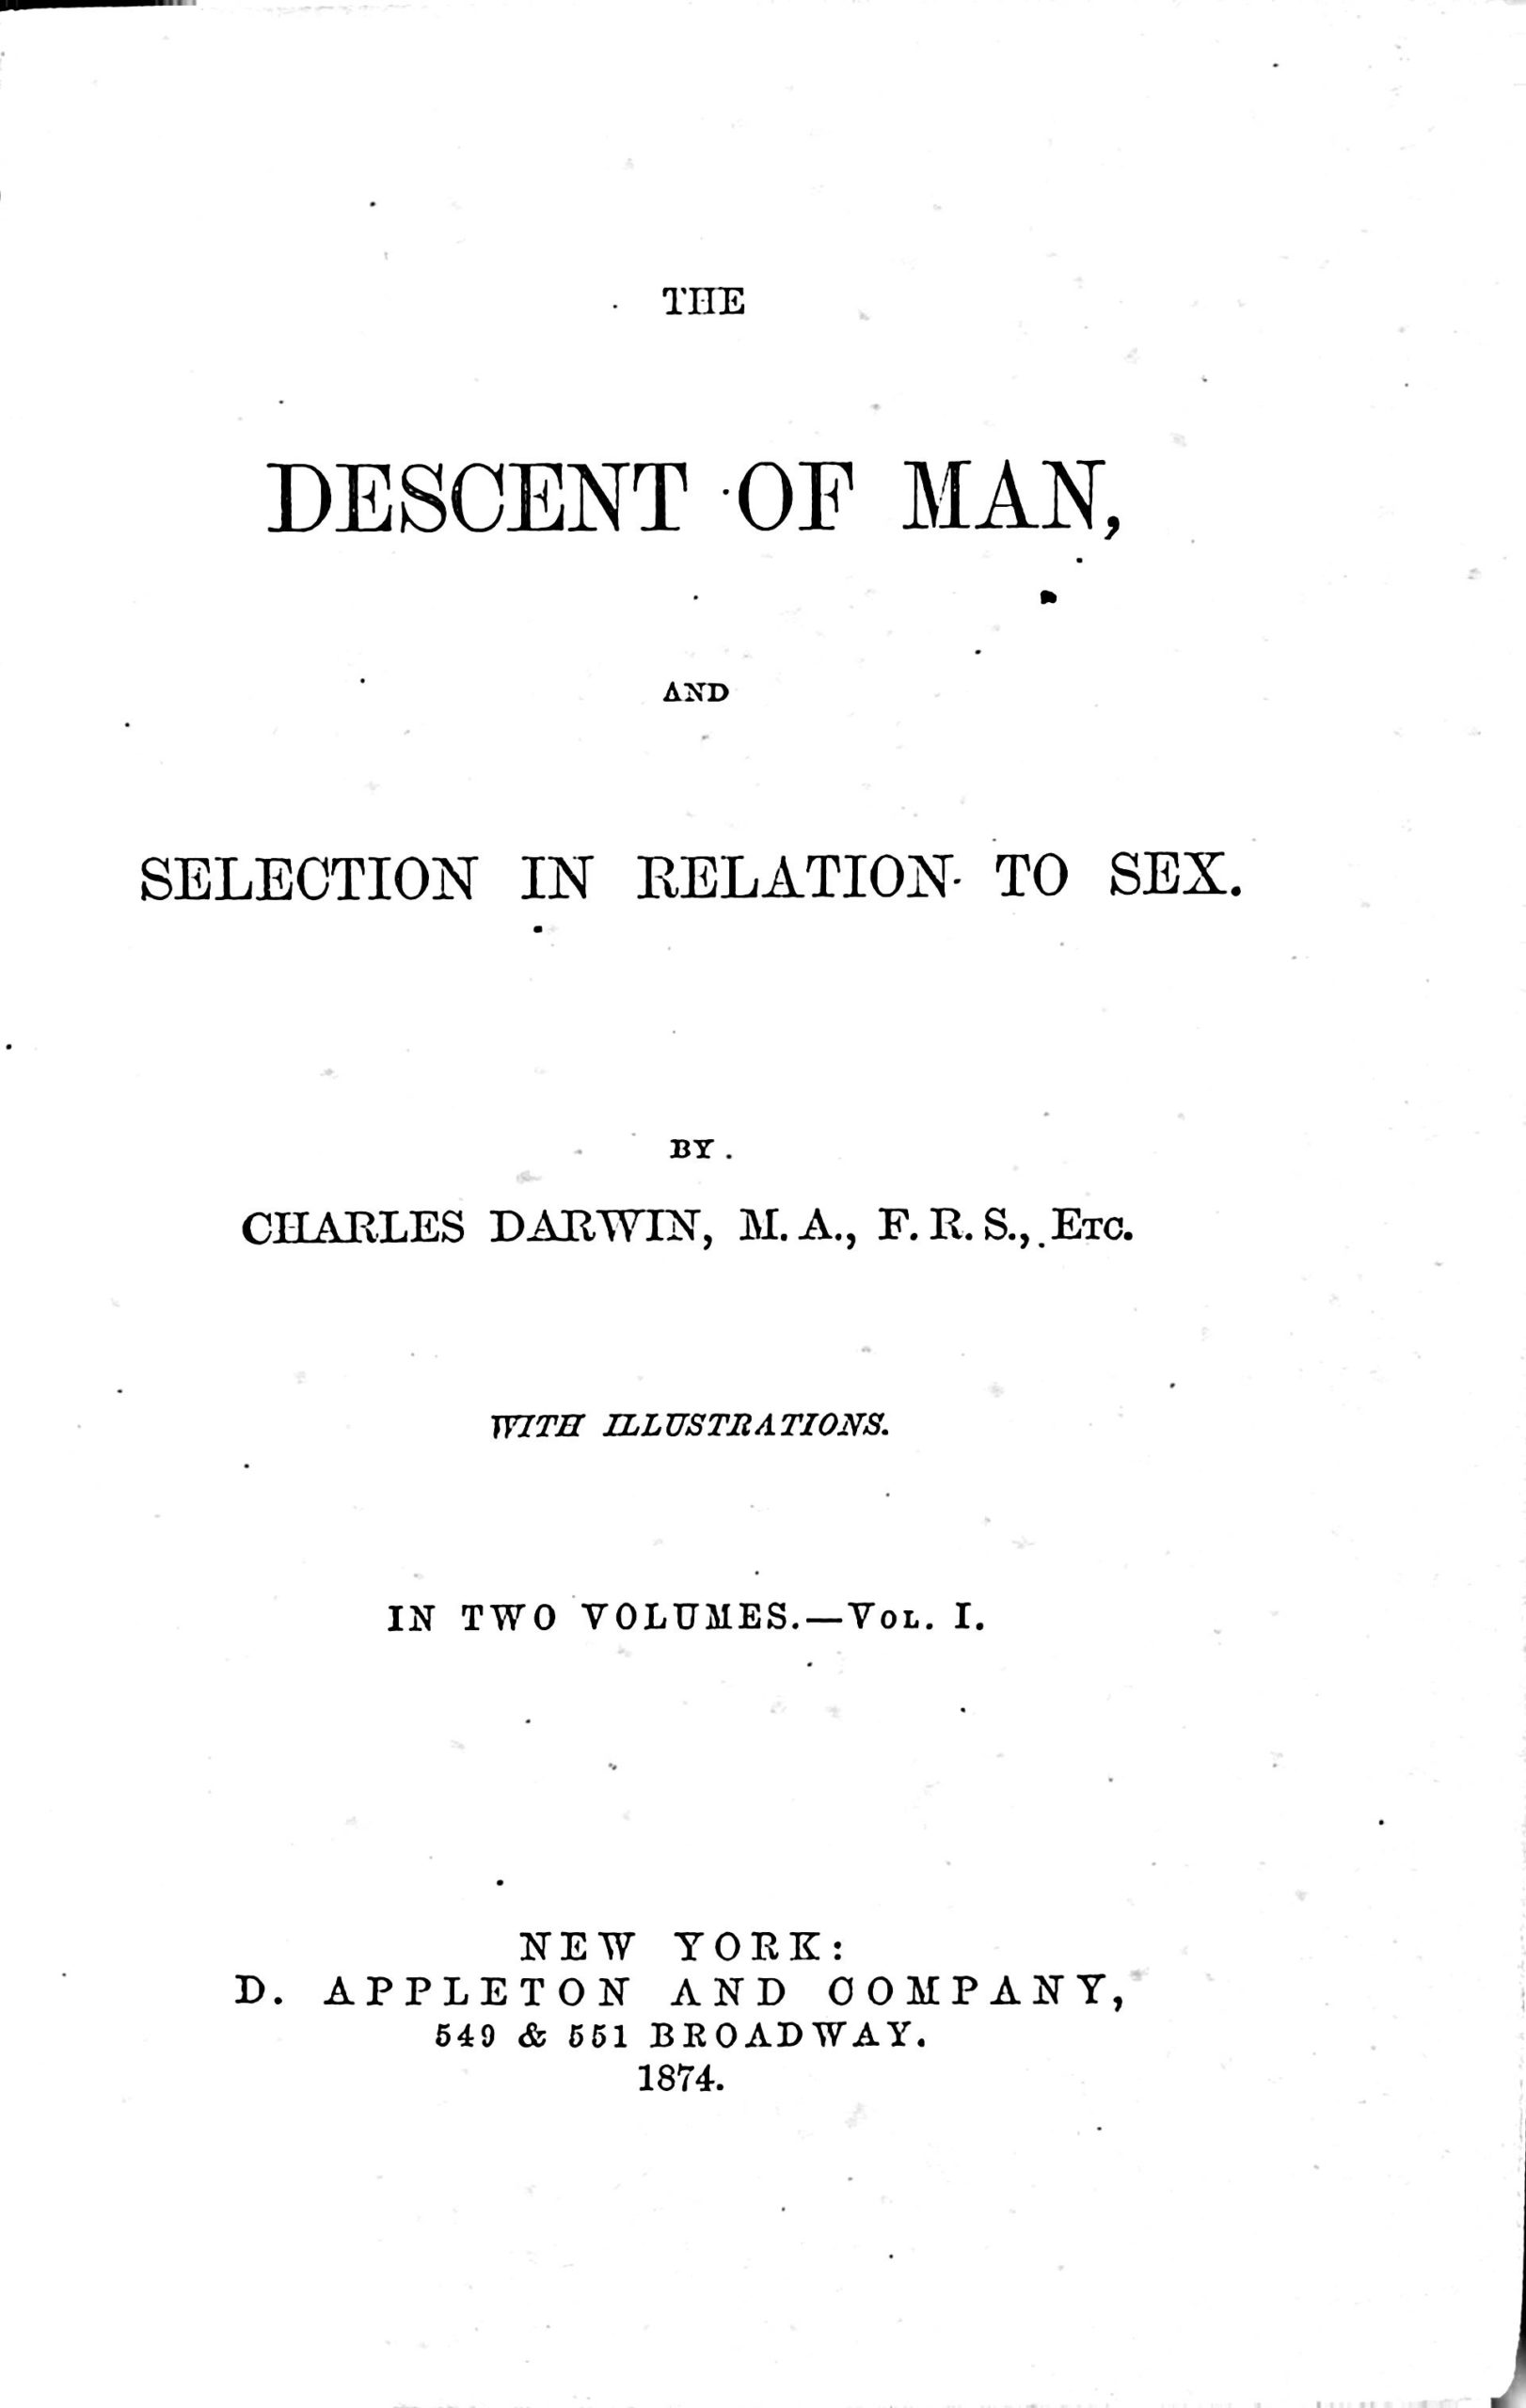 Charles Darwin, “The Descent of Man,” 1871